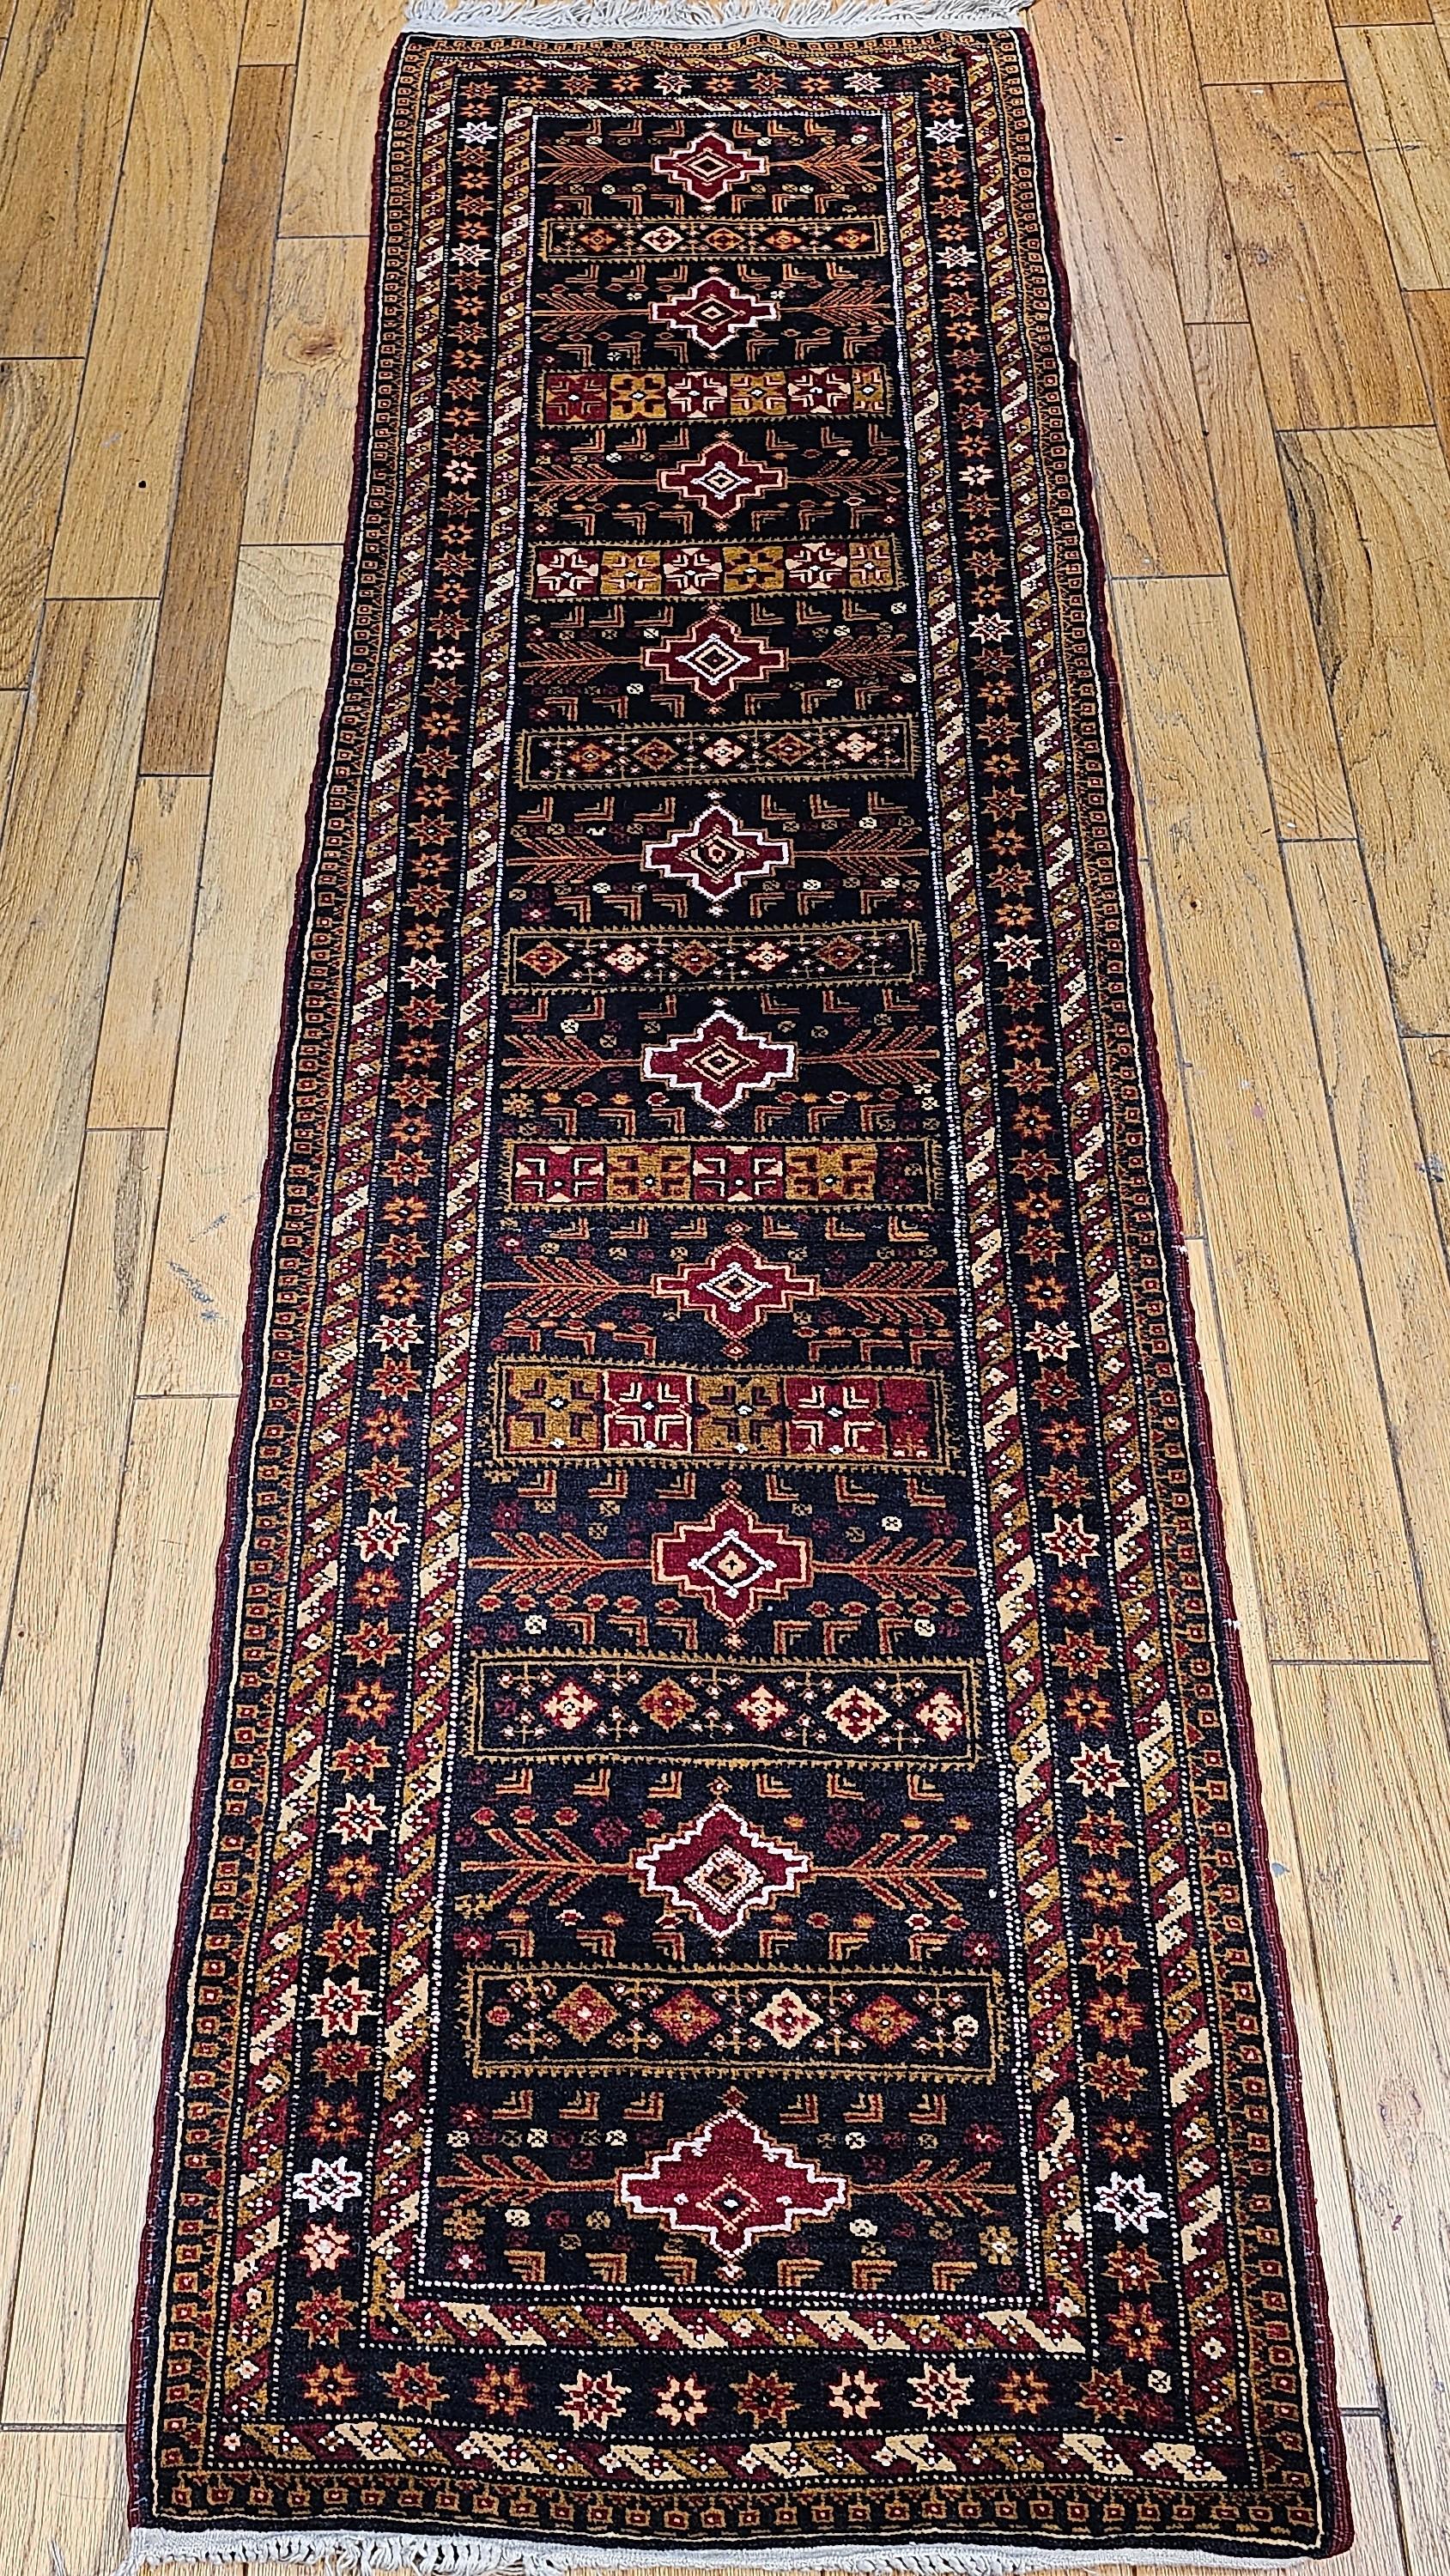 Vintage Afghan Tribal Runner in geometric pattern circa the mid 1900s.  The field in this Afghan tribal runner is a dark midnight blue color with designs in gold, red and brown colors throughout the field and the borders.  The surprising element is